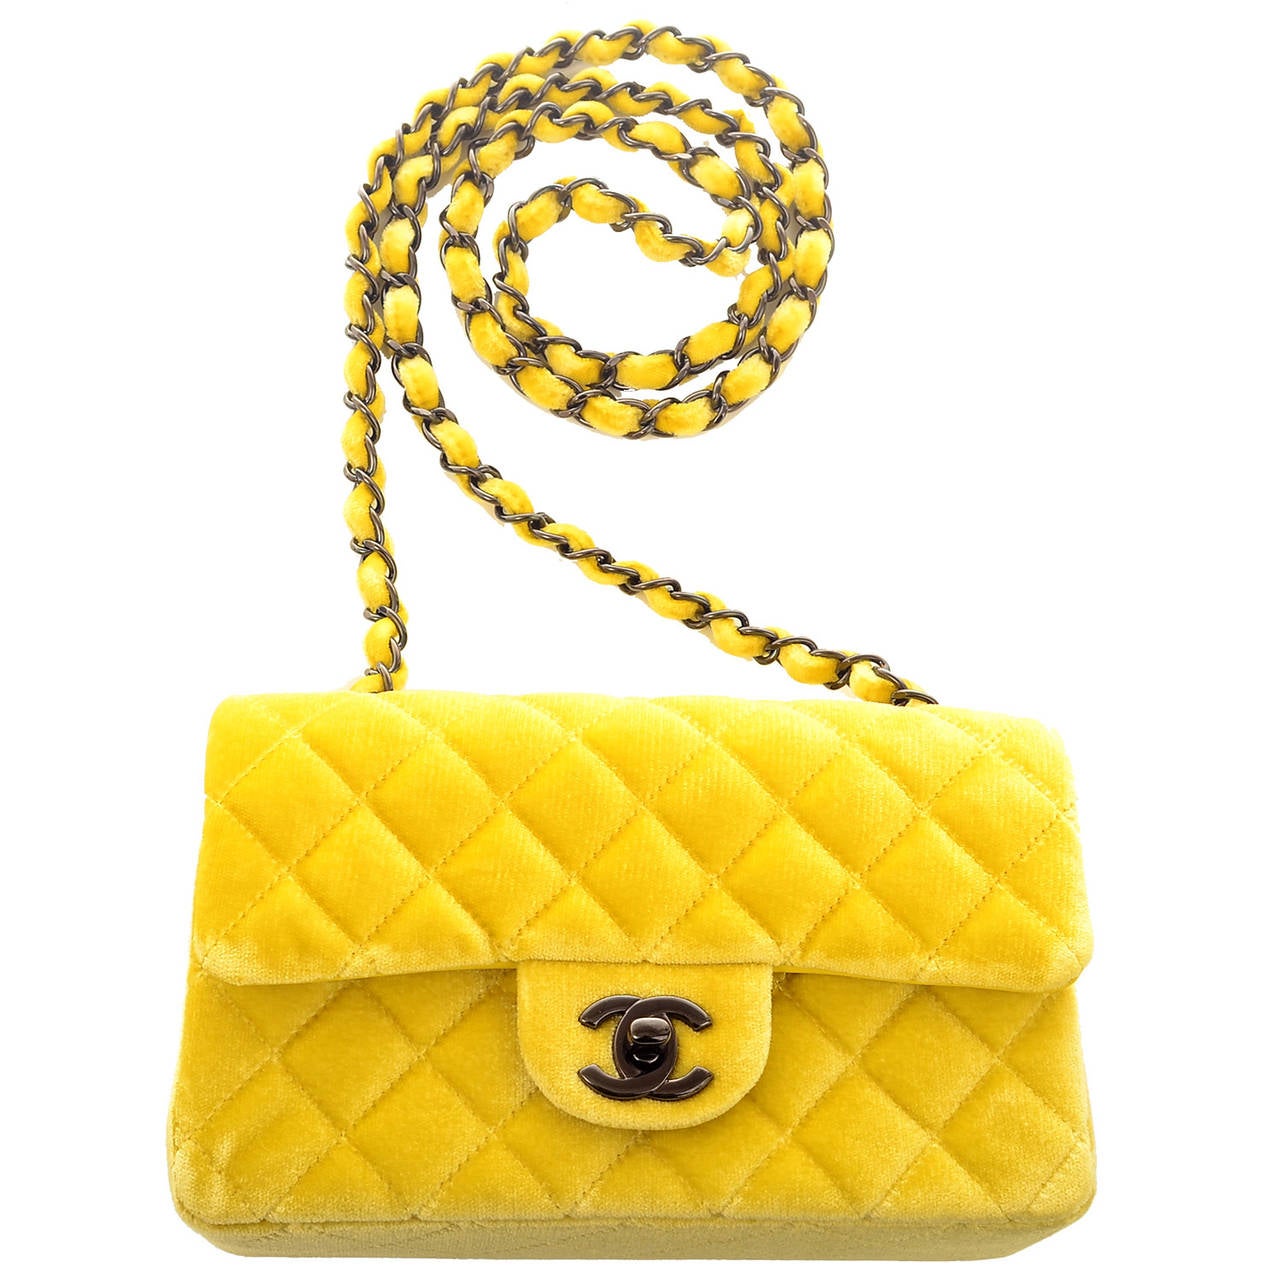 Chanel Yellow Quilted Velvet Small Classic 2.55 Flap Bag 4